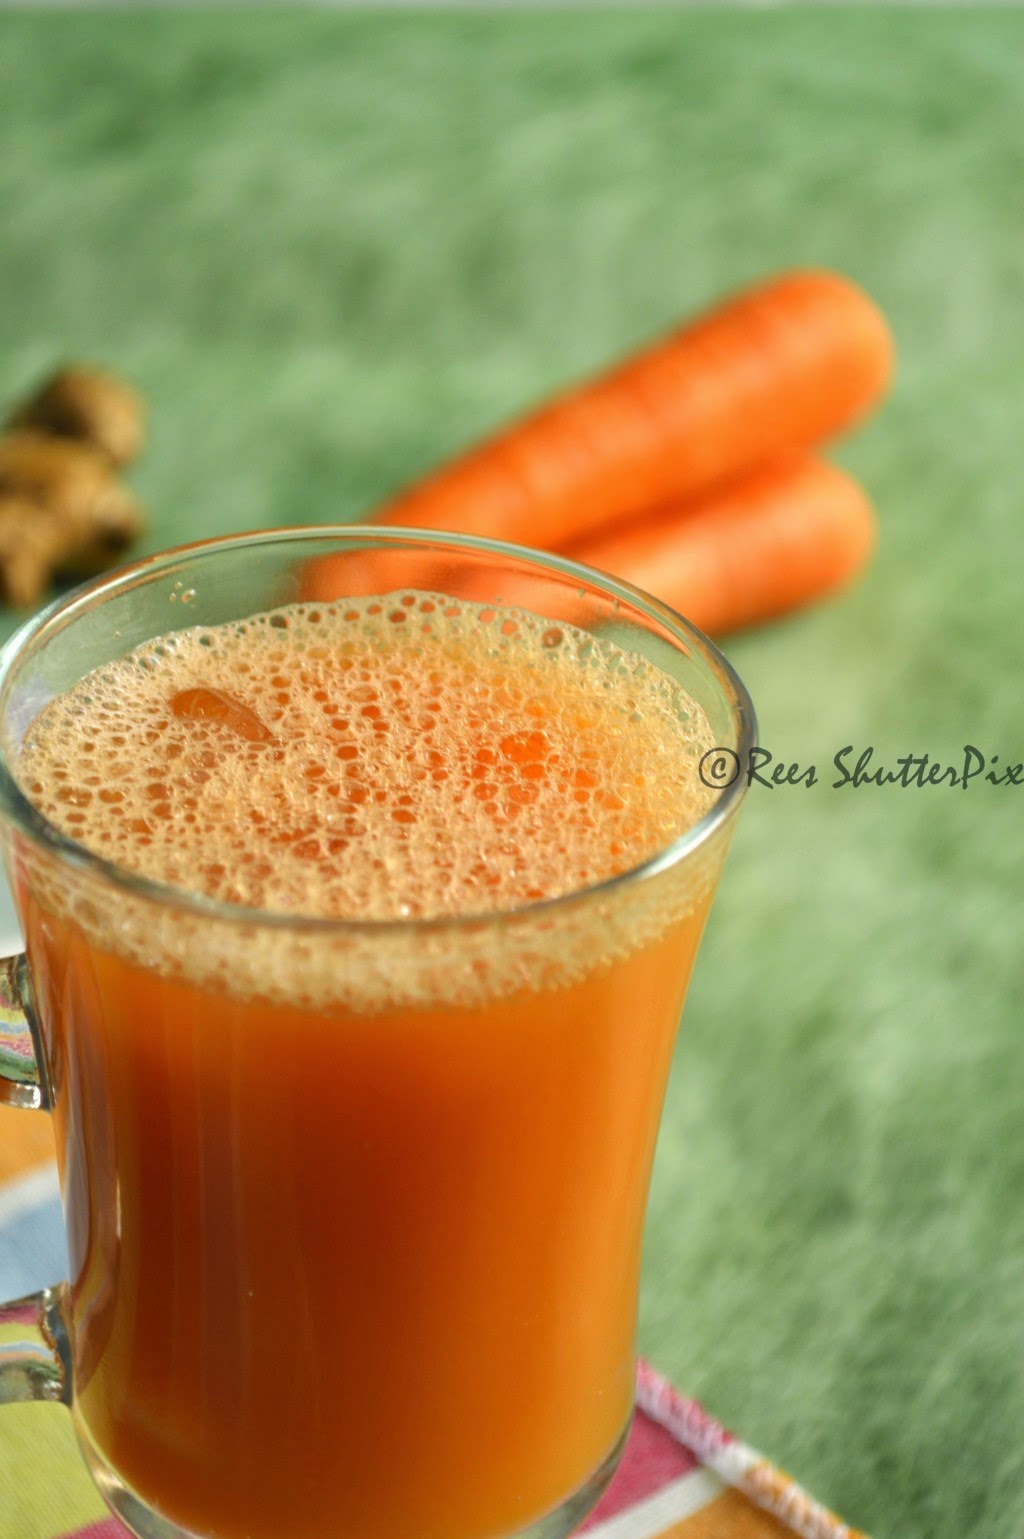 Beverages, Juice Recipes, Summer Drinks, carrot juice, weight loss drink, how to make refreshing carrot juice, carrot juice for kids, kids drinks, energy drinks